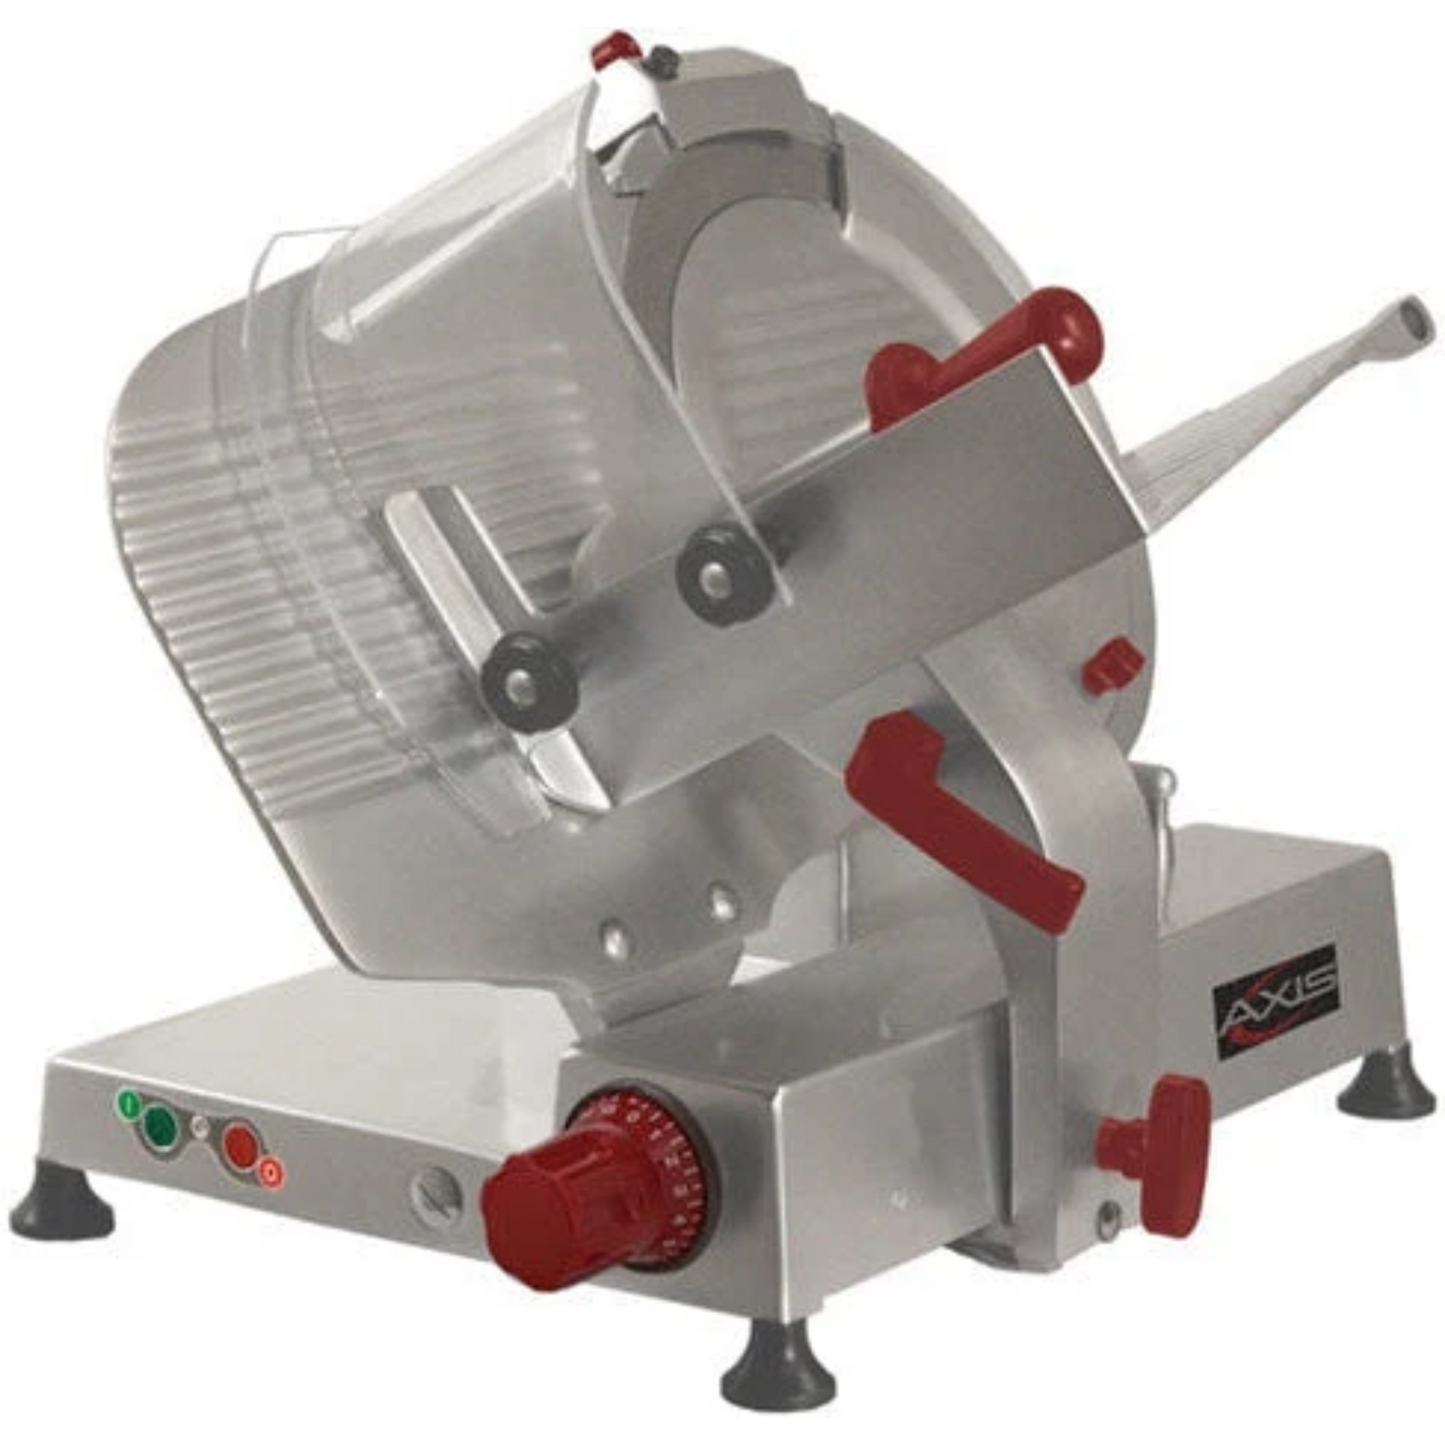 Axis AX-S14 ULTRA Manual Commercial Meat Slicer with 14" Blade, Belt Driven 1/2 HP